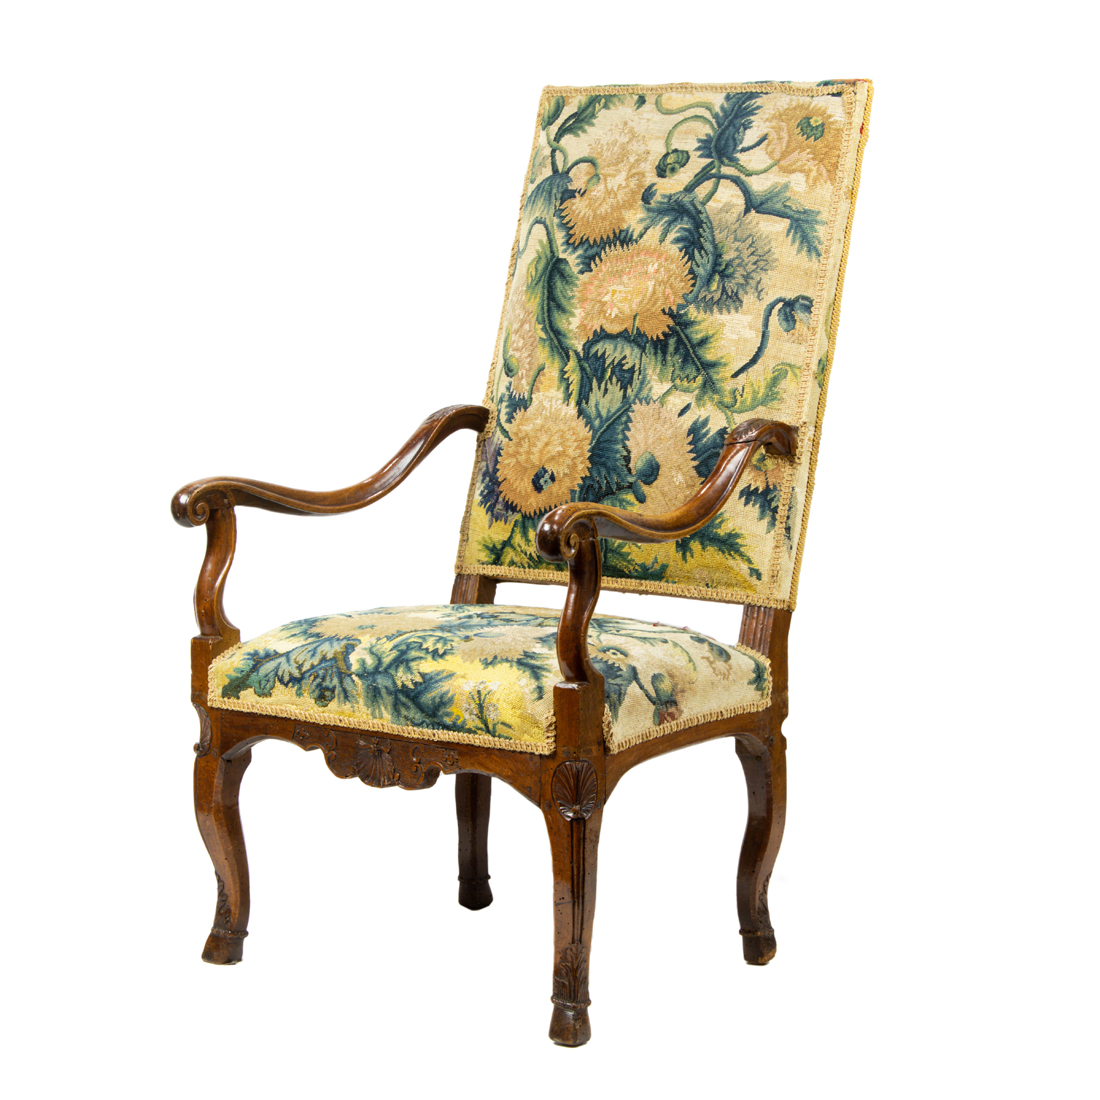 A FRENCH CARVED HALL CHAIR CIRCA